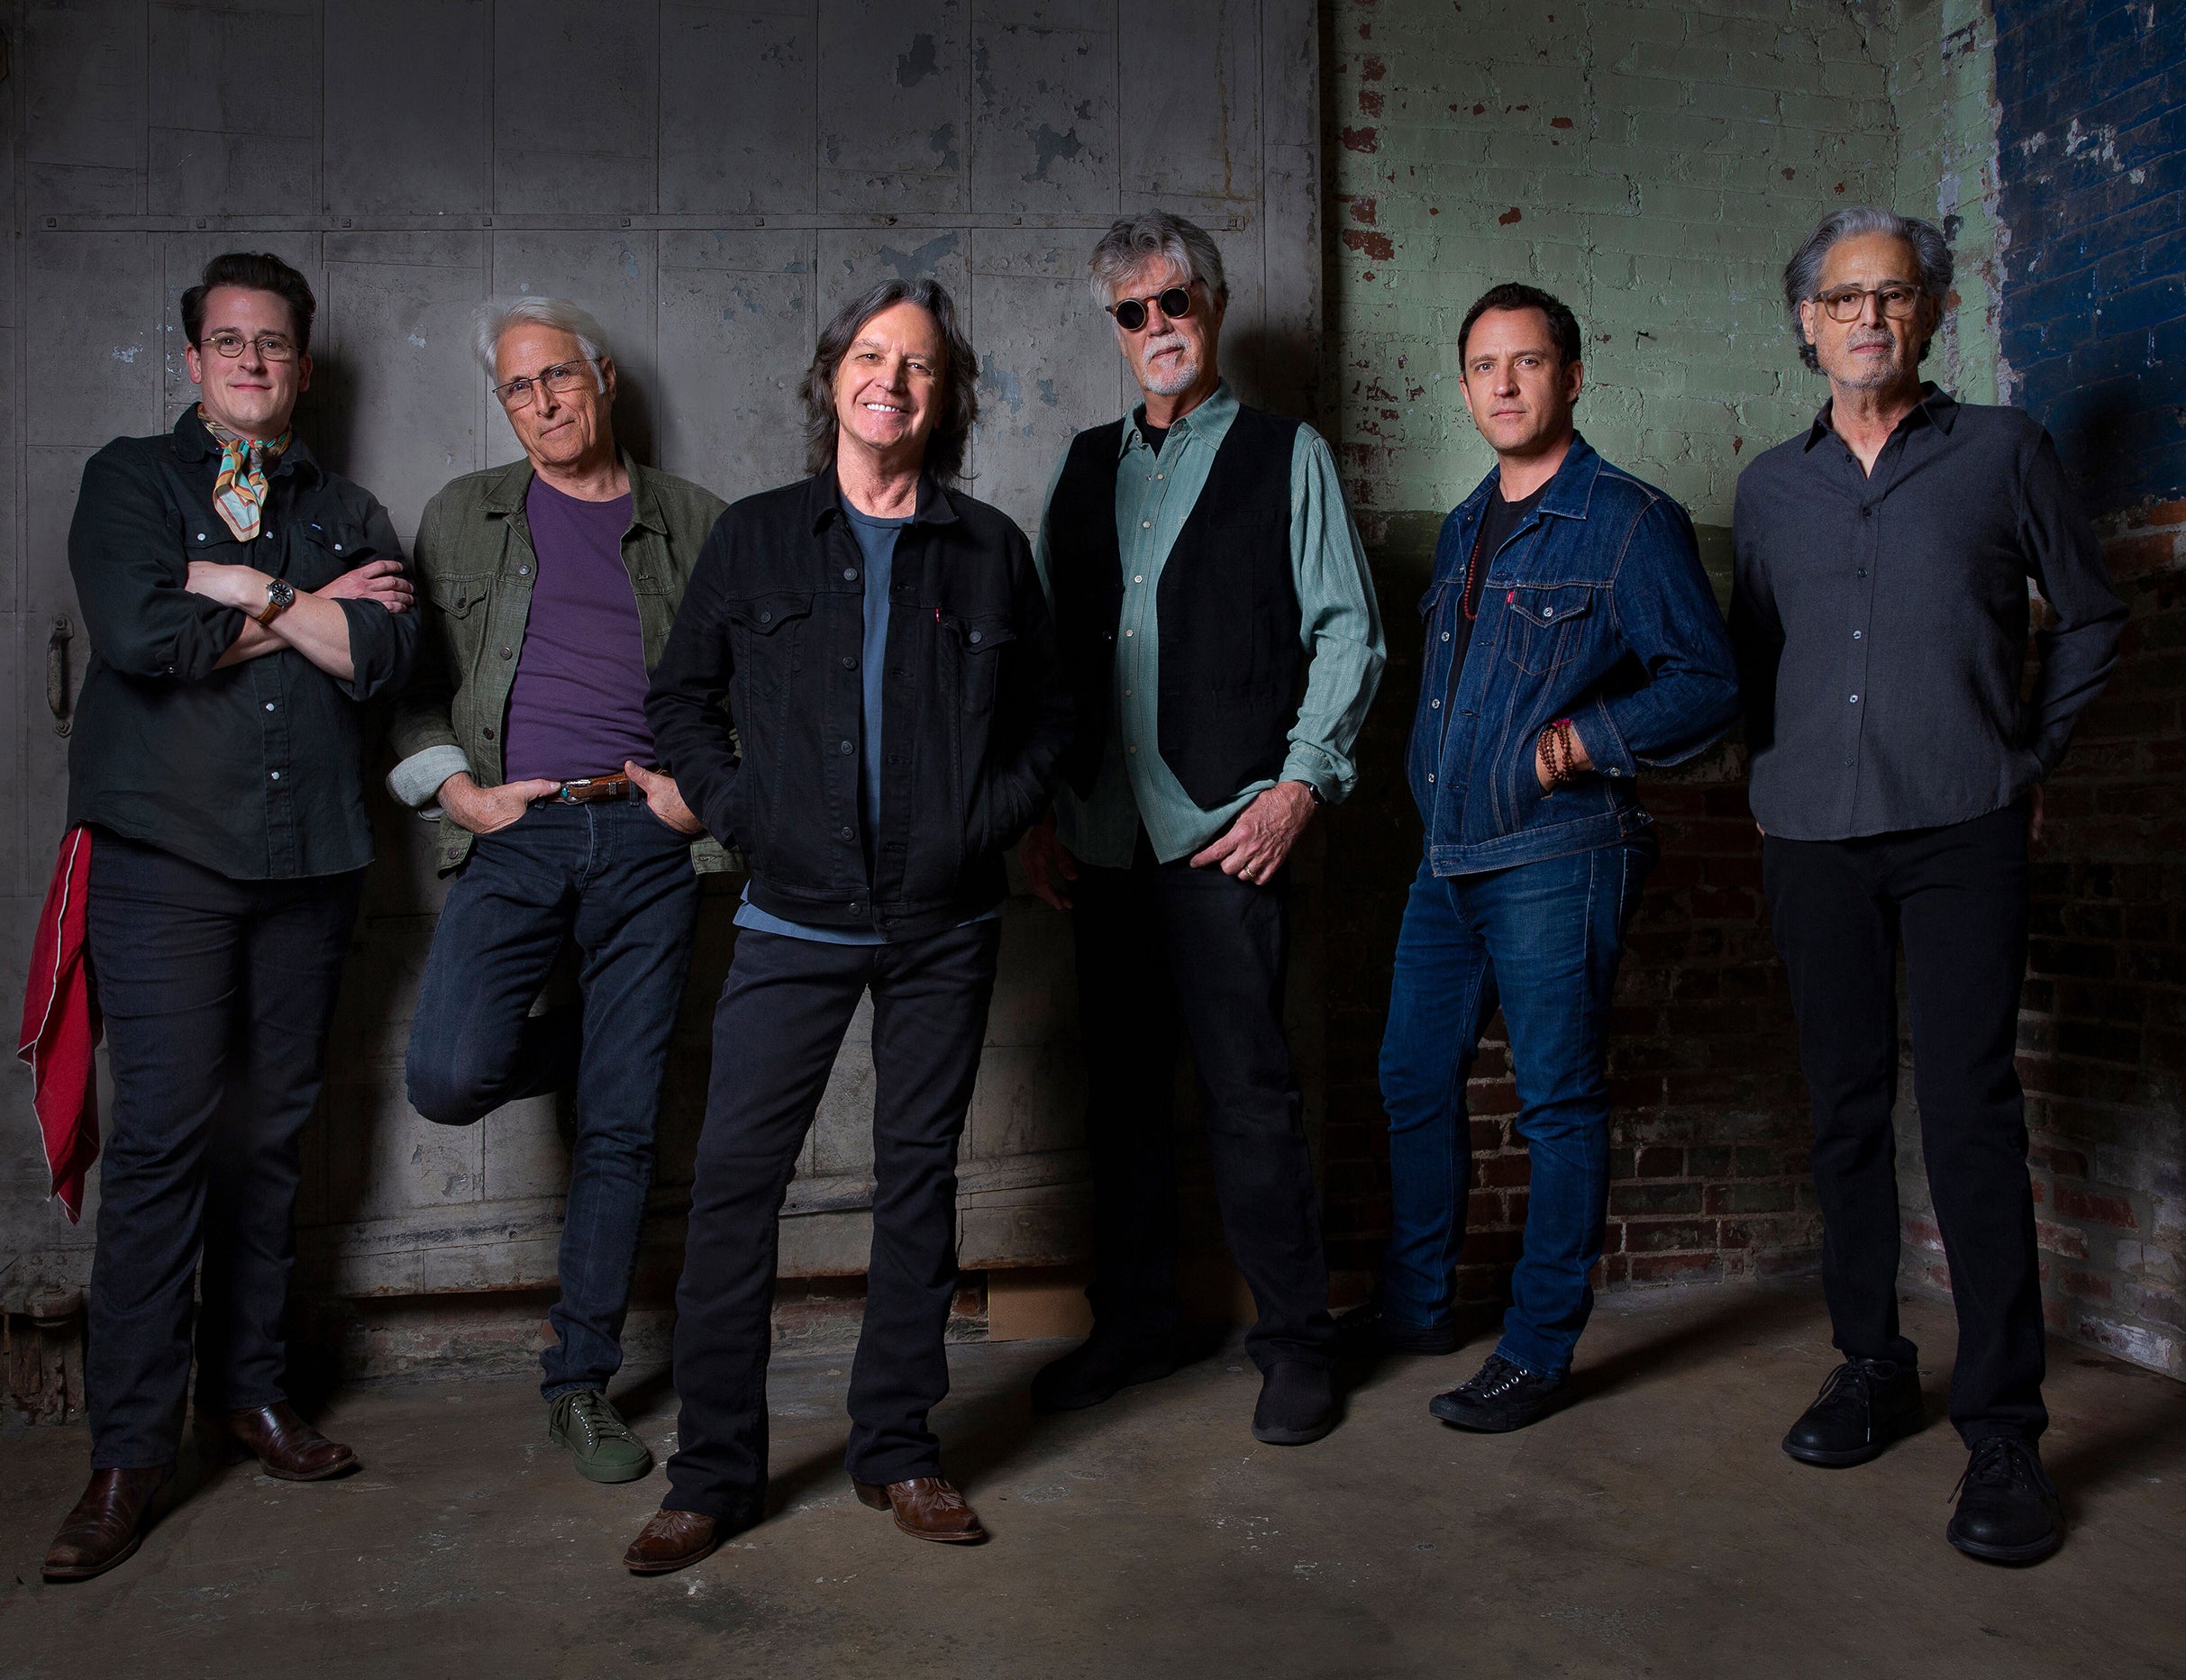 Nitty Gritty Dirt Band free presale code for show tickets in Mankato, MN (Vetter Stone Amphitheater)